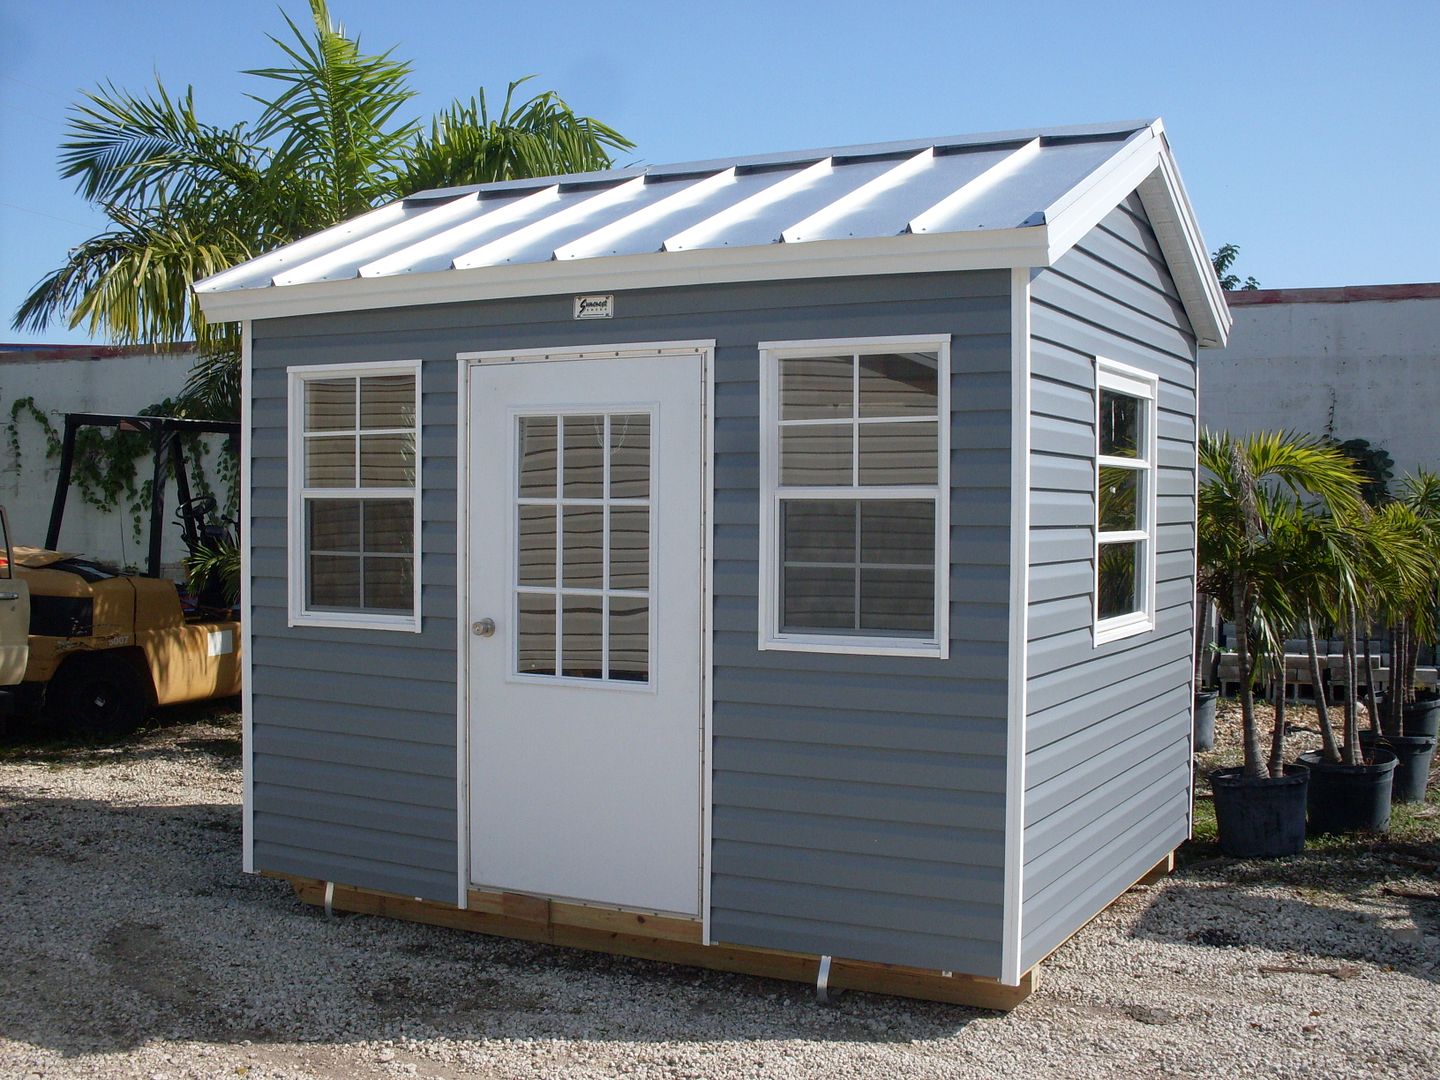 Sale on sheds South florida approved, Dade county approved, Broward ...